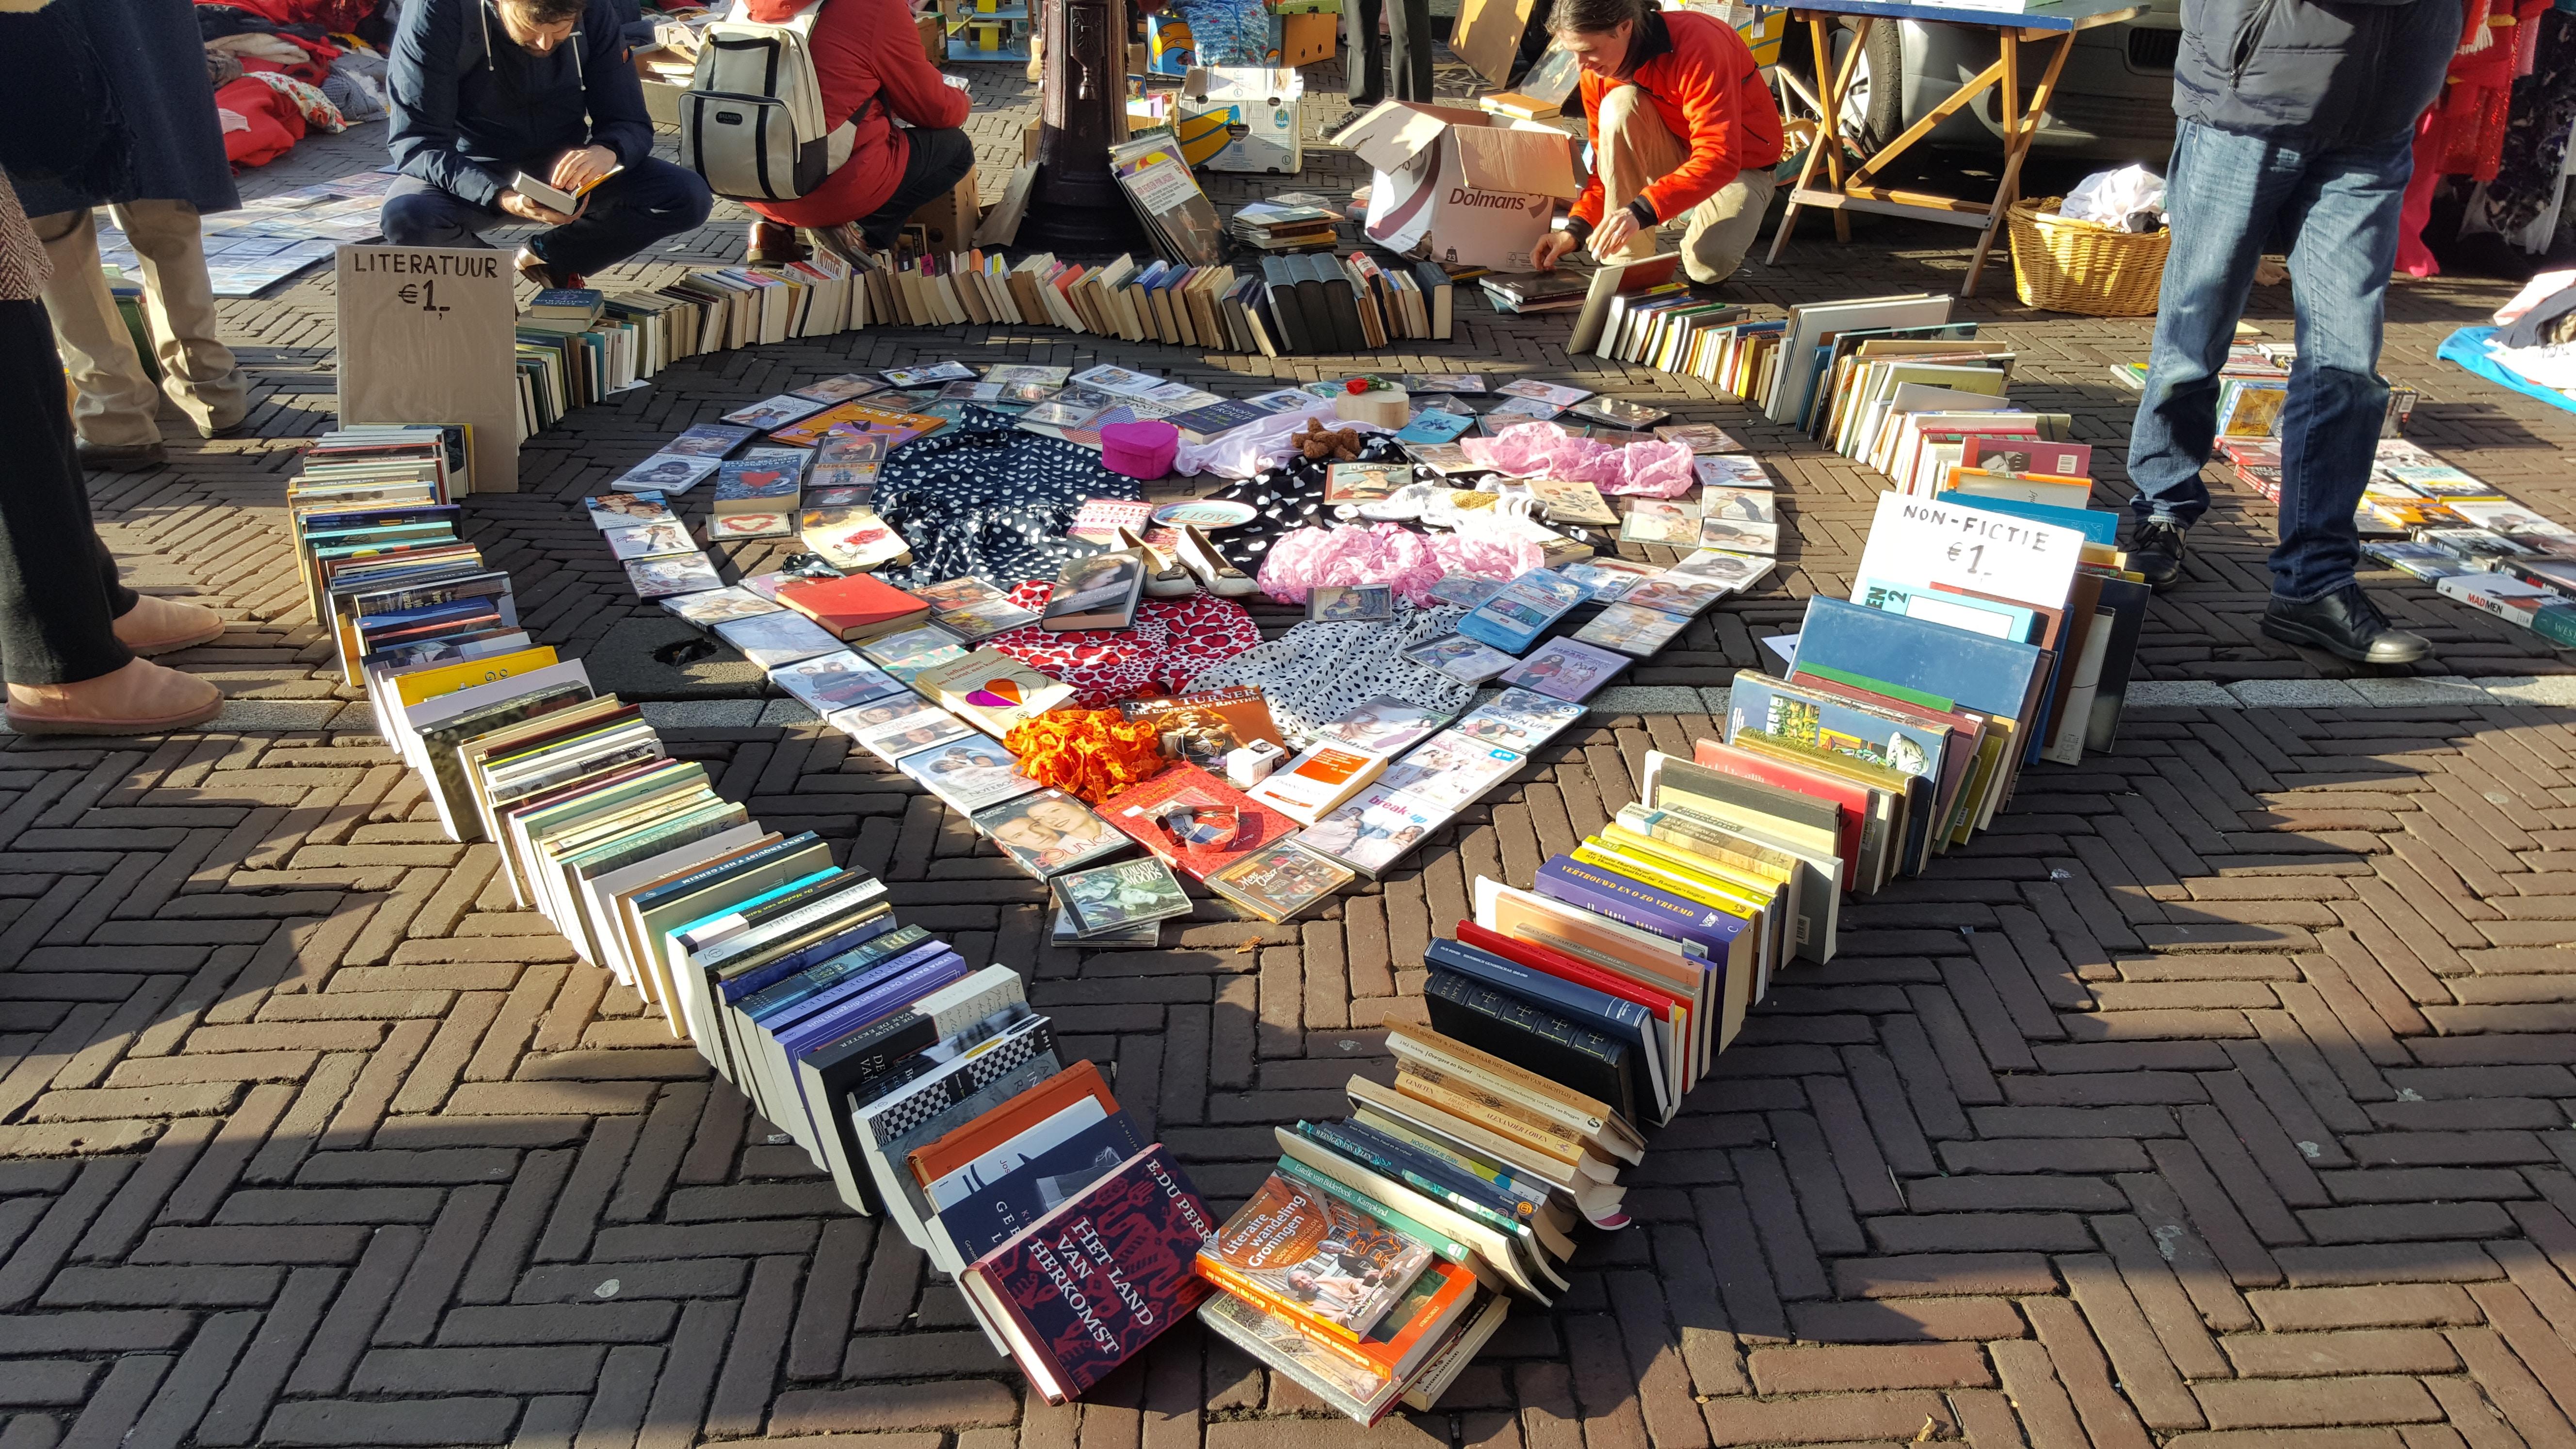 Heart shape made out of books on sidewalk